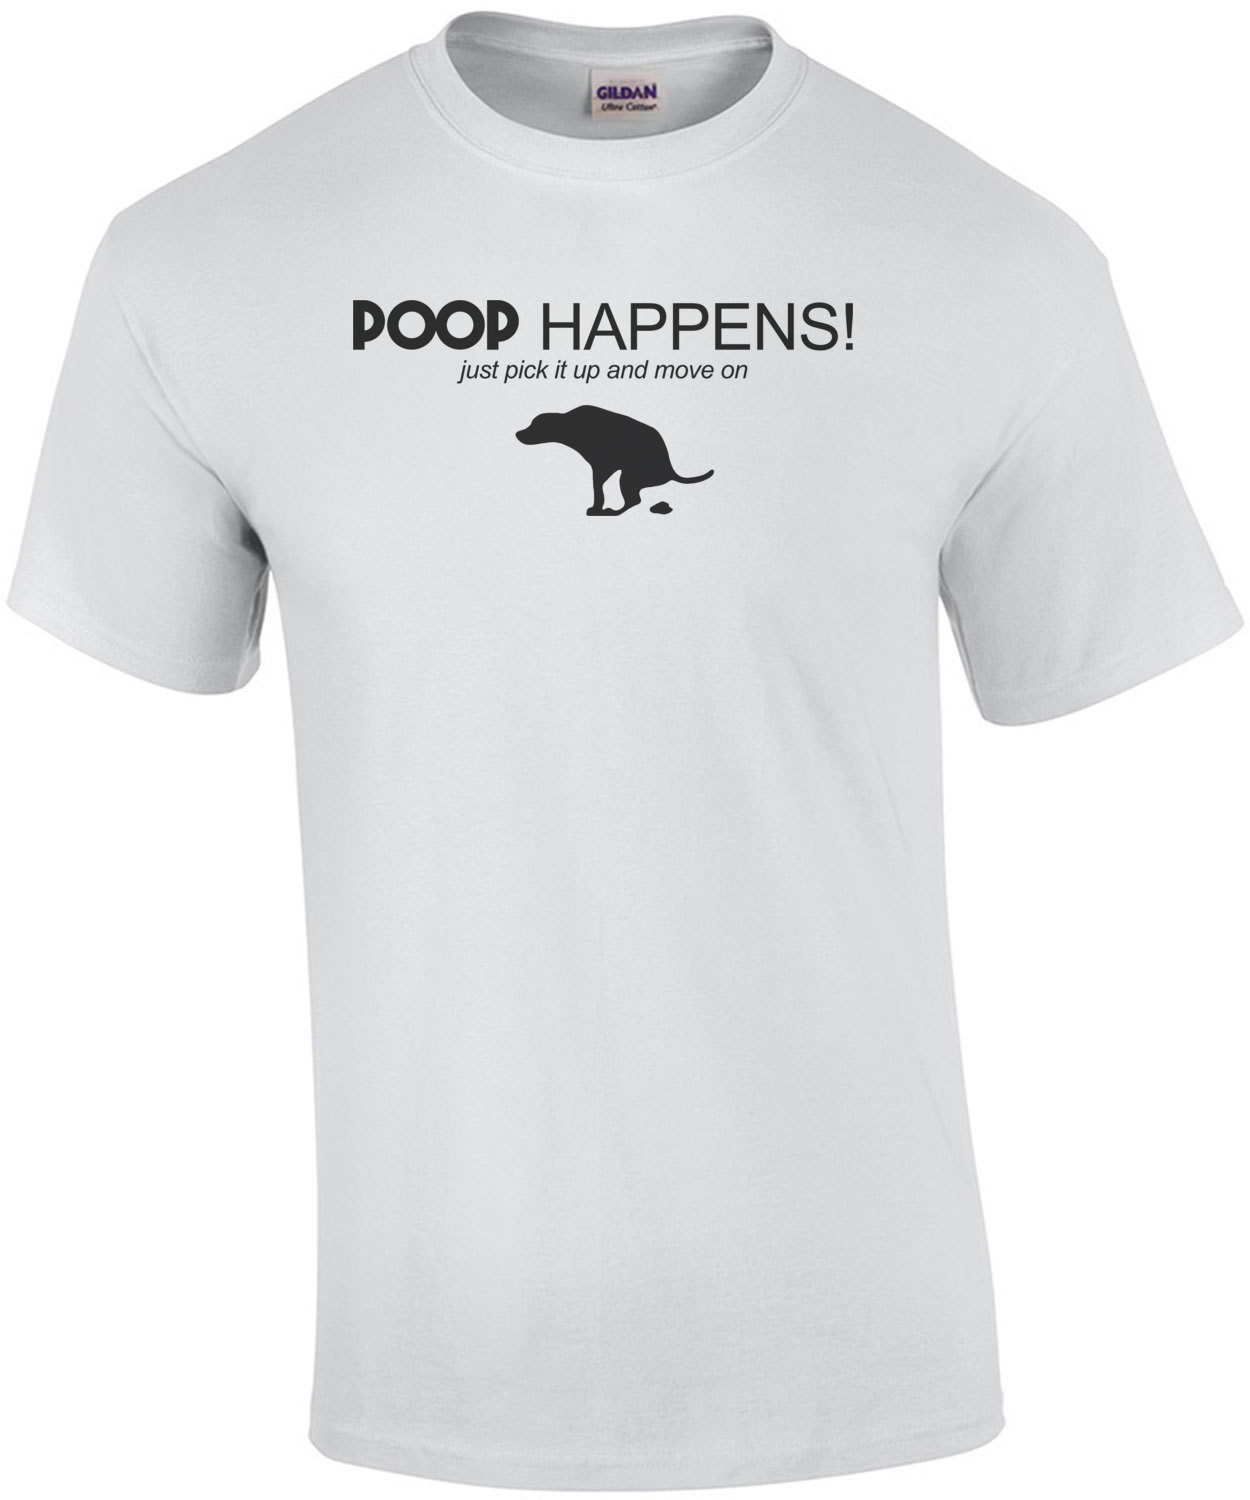 Poop happens! just pick it up and move on - dog